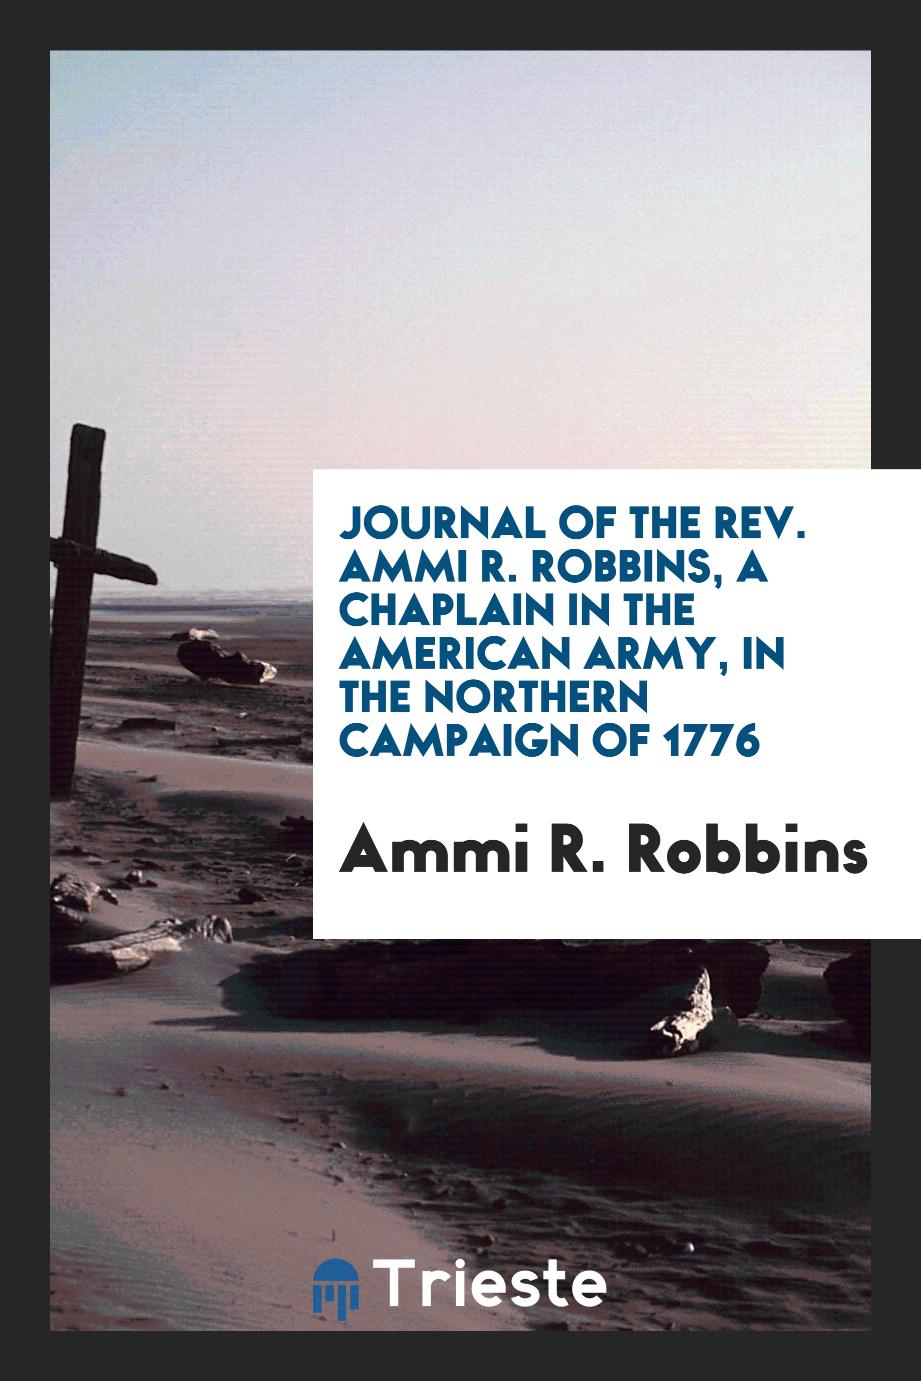 Journal of the Rev. Ammi R. Robbins, a Chaplain in the American Army, in the Northern Campaign of 1776